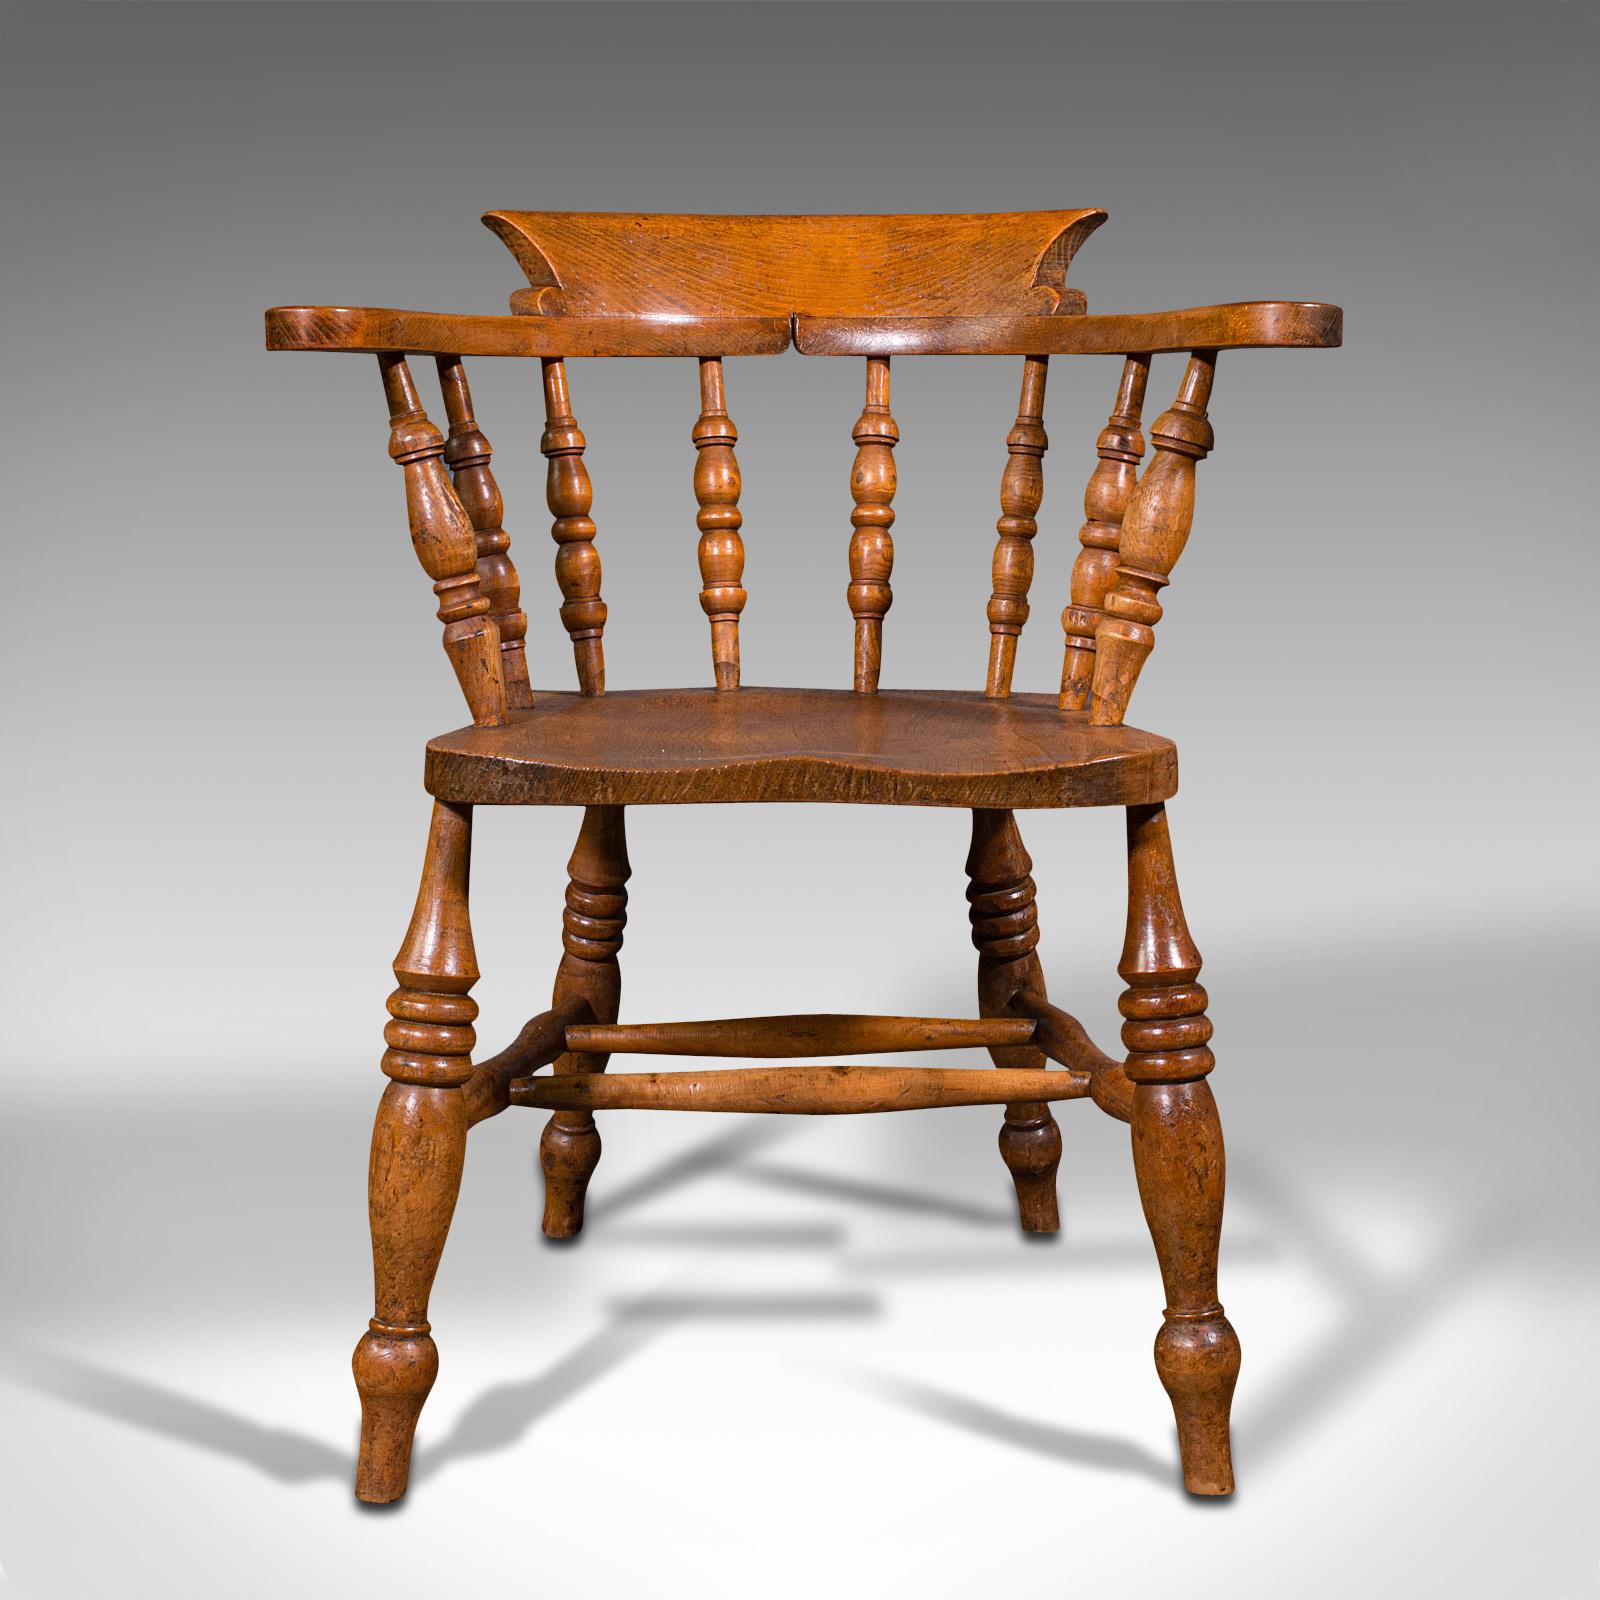 This is an antique elbow chair. An English, beech and elm smoker's bow or captain's chair, dating to the Victorian period, circa 1900.

Country house appeal with classic bow form
Displays a desirable aged patina and in good order
Select elm and